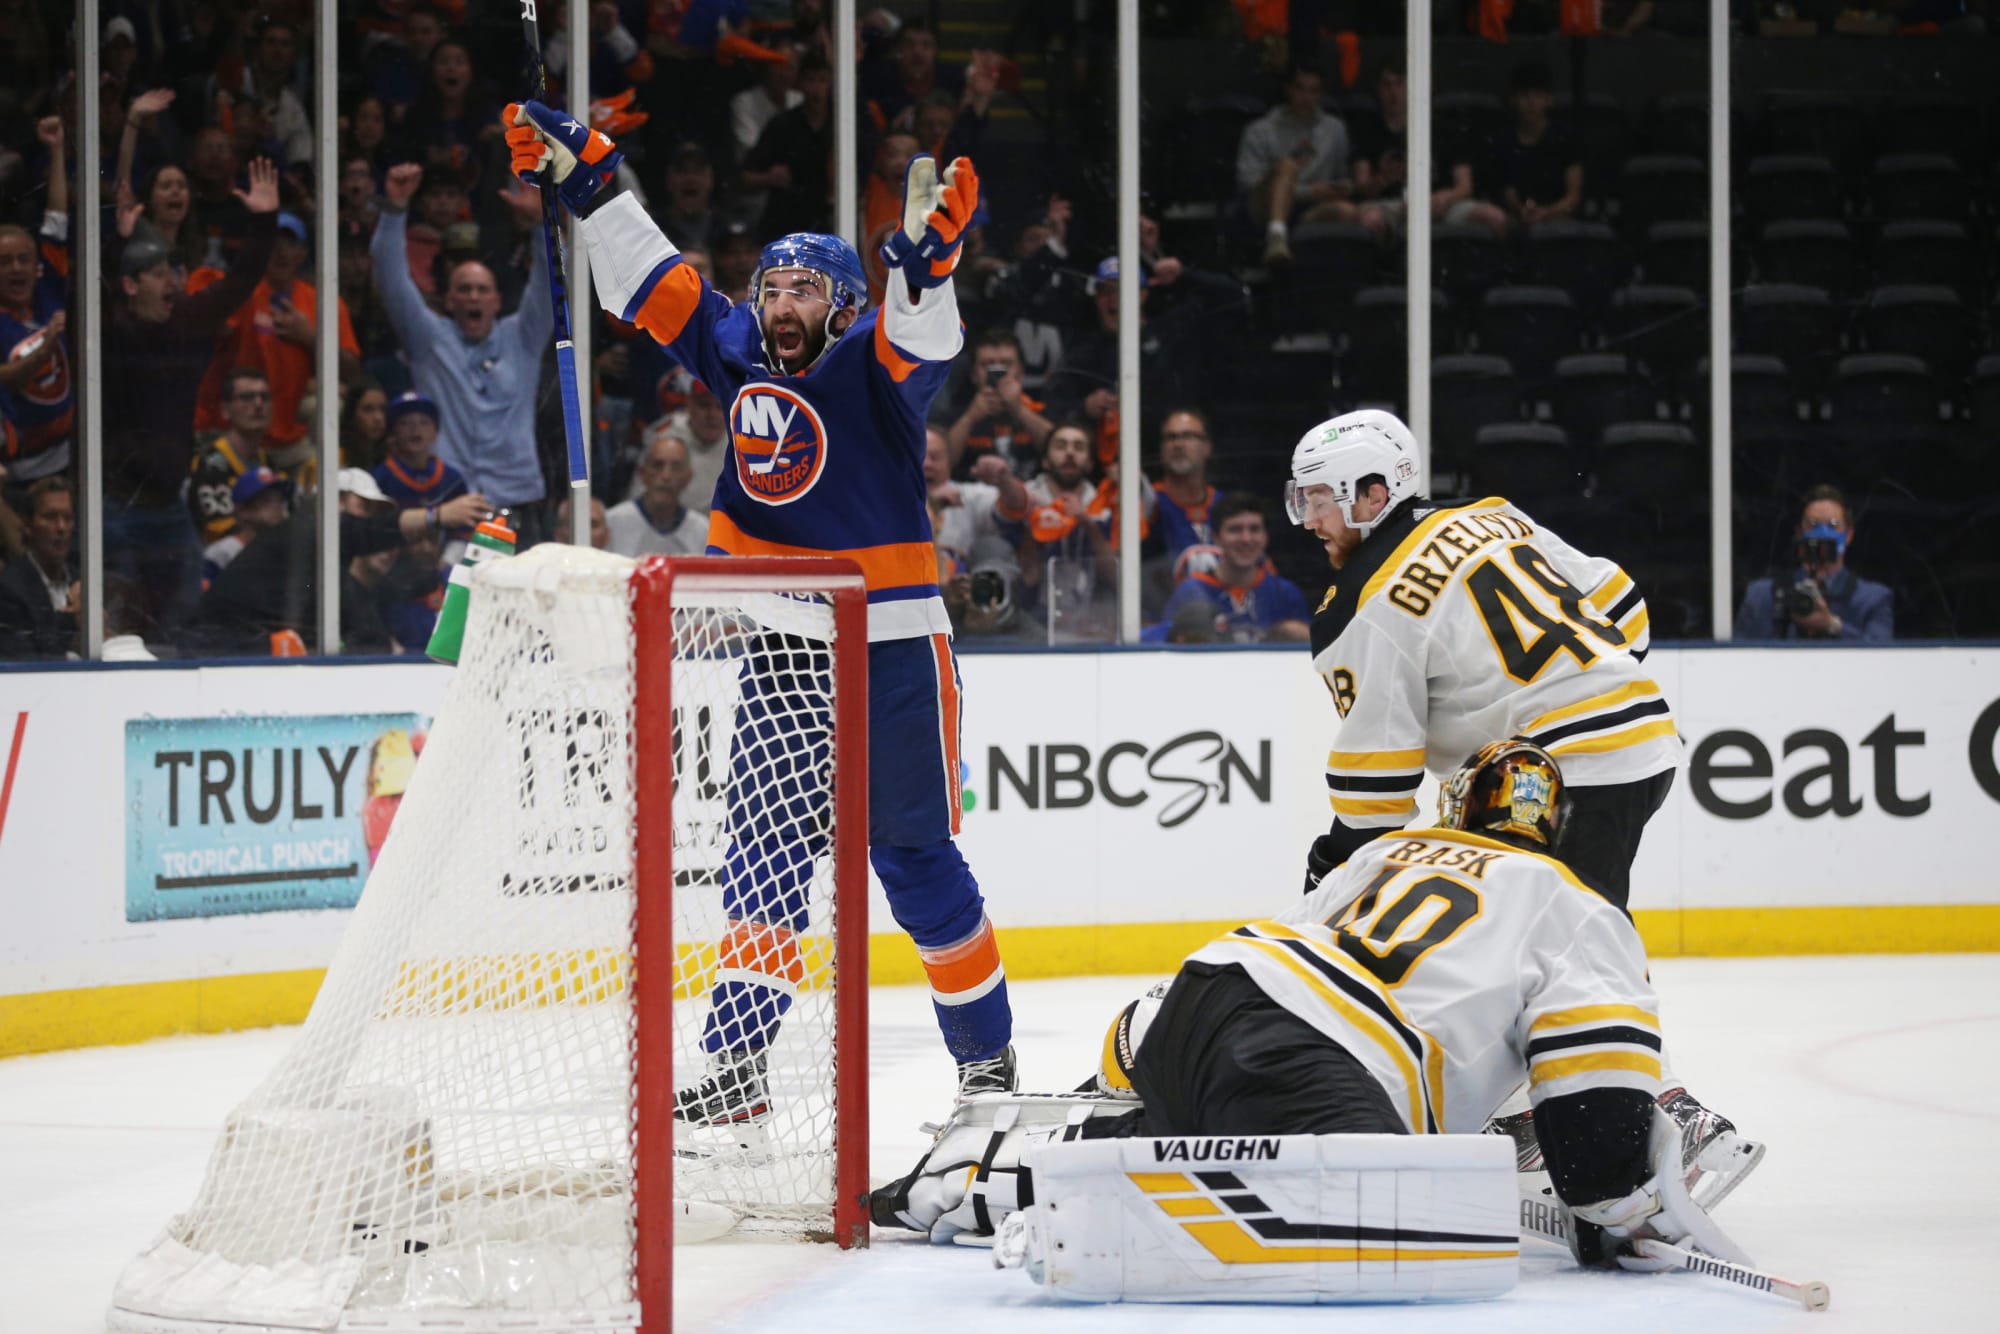 Boston Bruins Eliminated With Game 6 Loss to Islanders